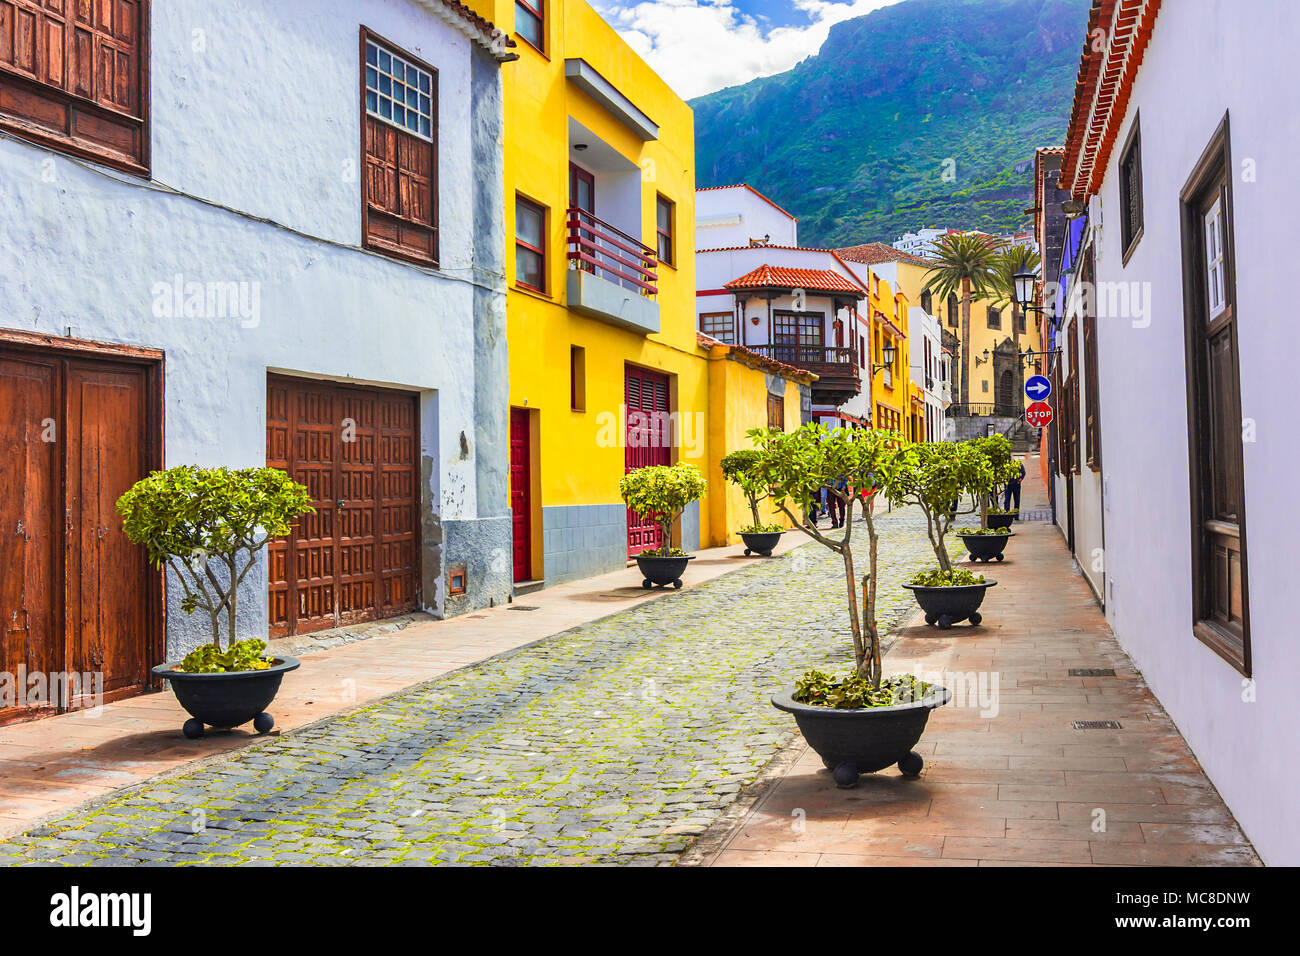 Garachico, Tenerife, Canary islands, Spain: Street view  of the colorful and beautiful town of Garachico. Stock Photo